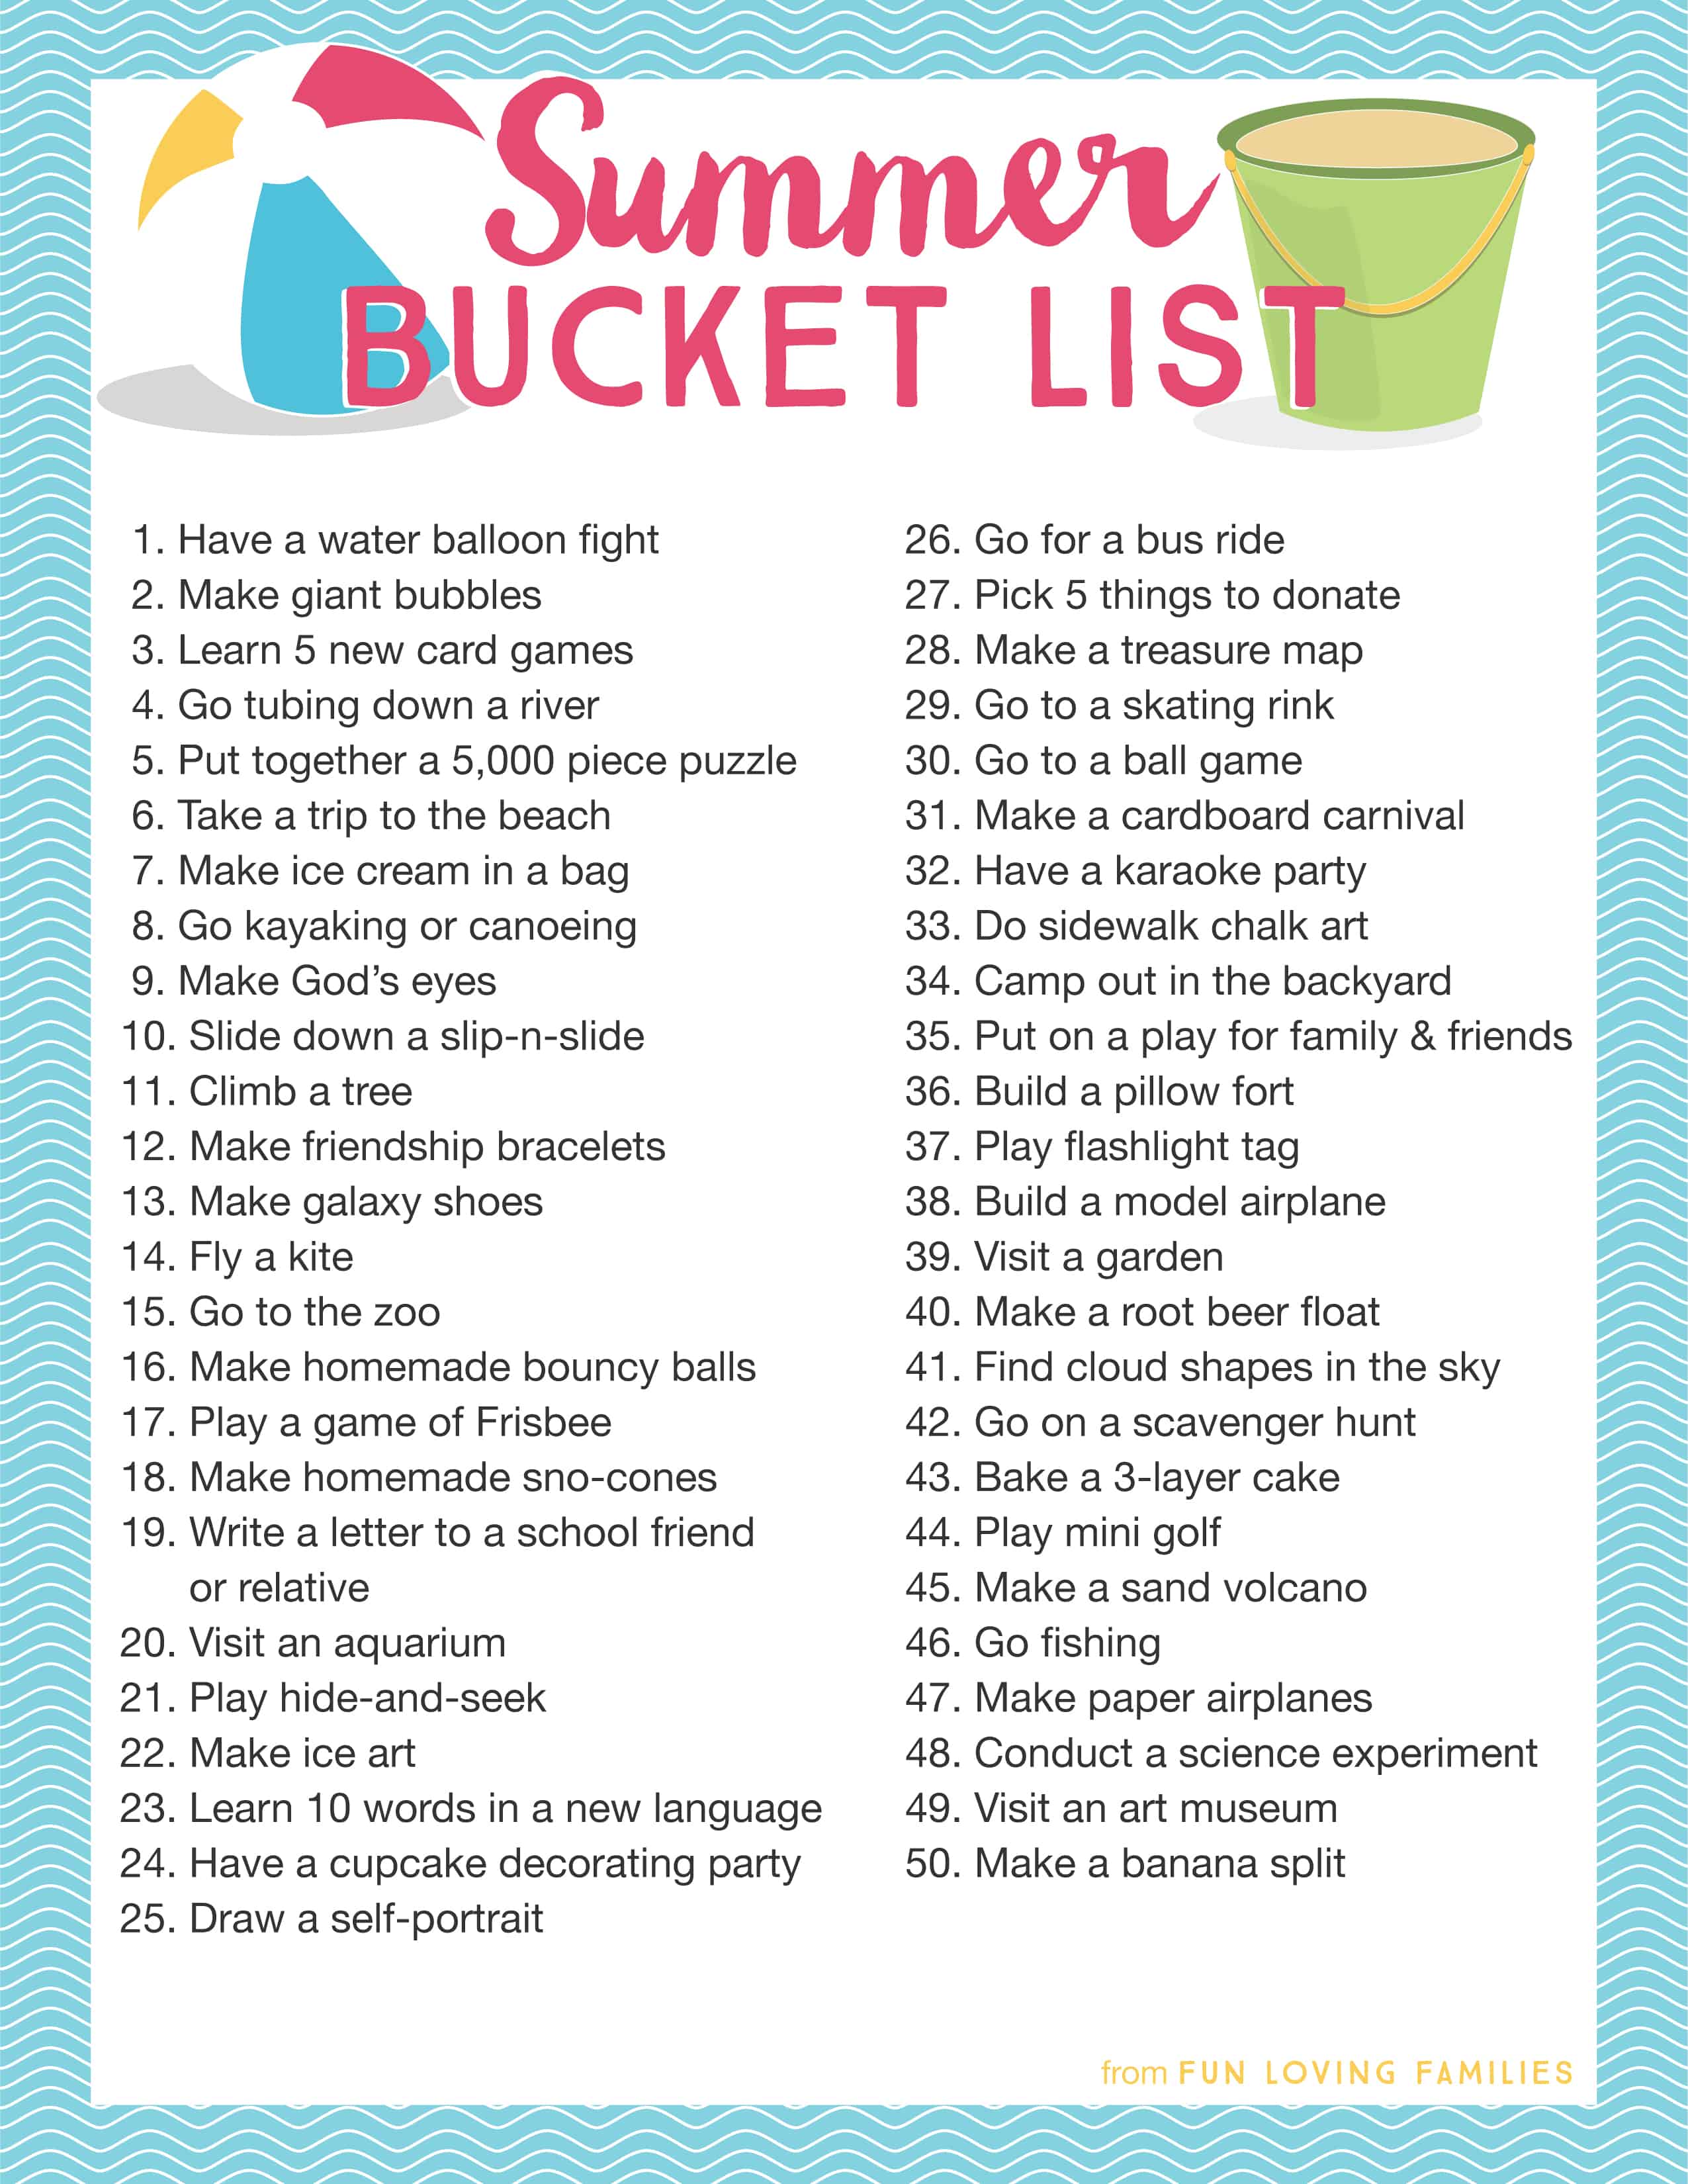 create-your-own-summer-bucket-list-printable-a-little-moore